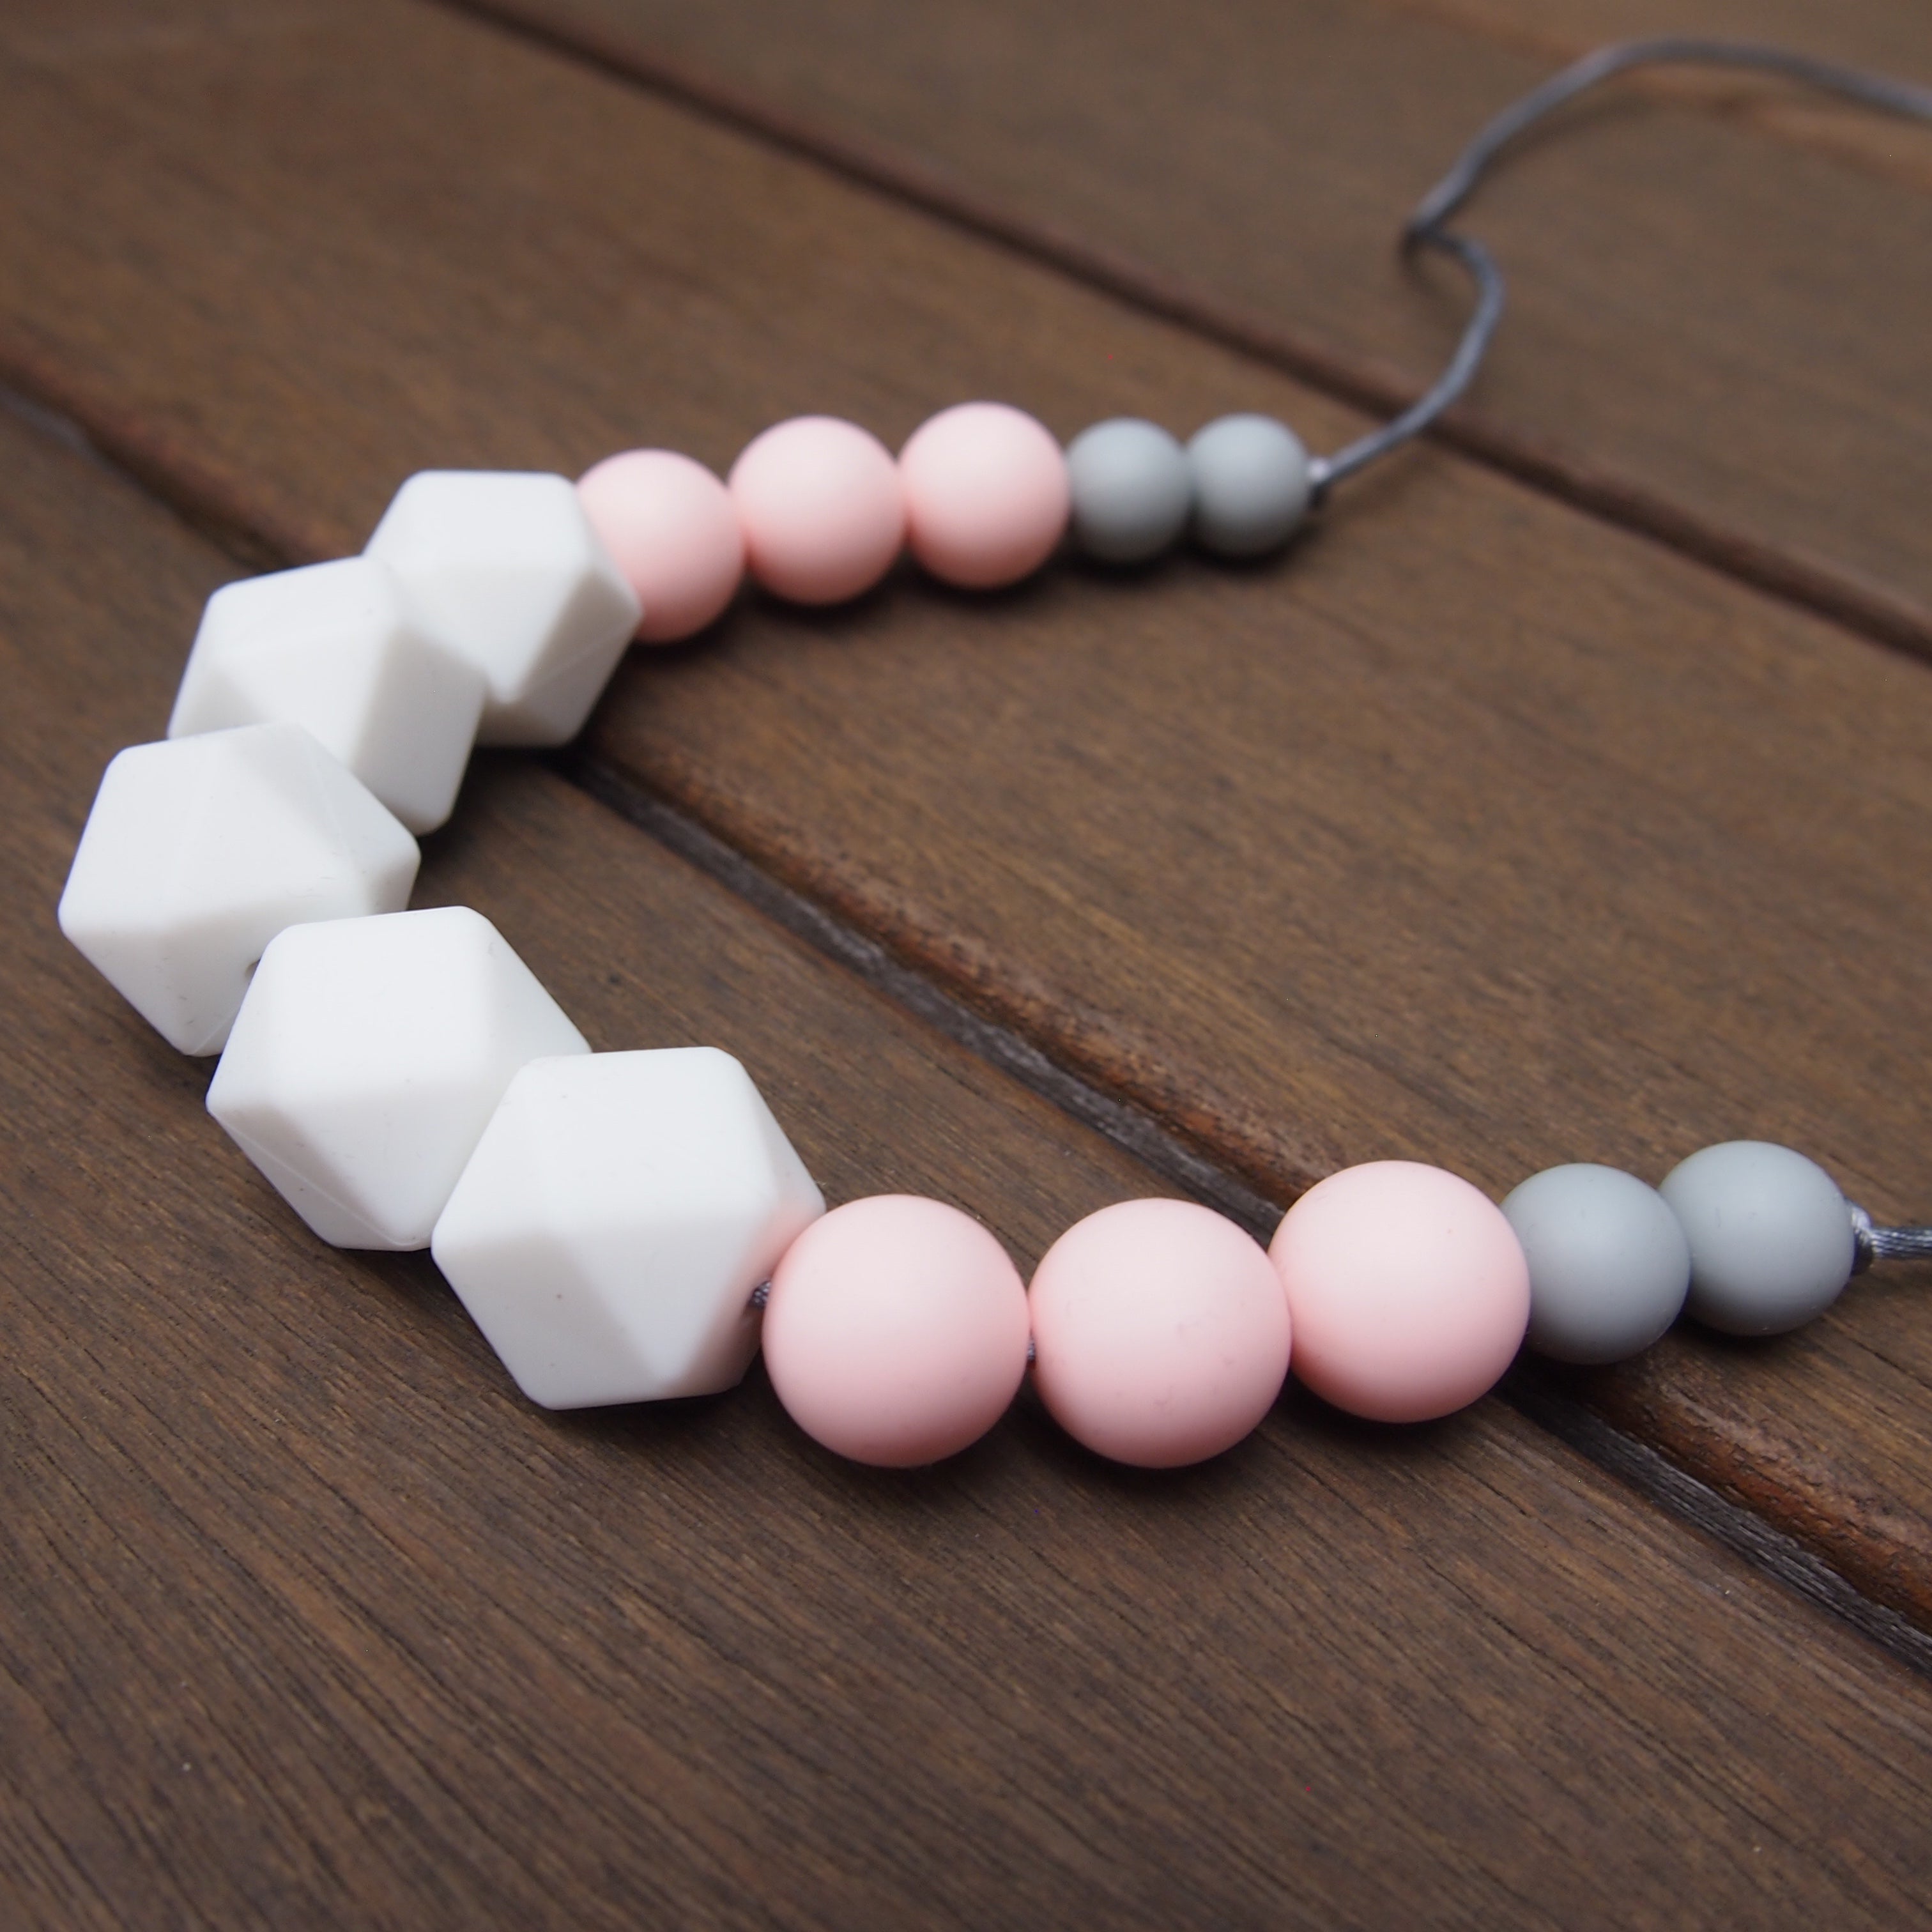 silicone bead necklace